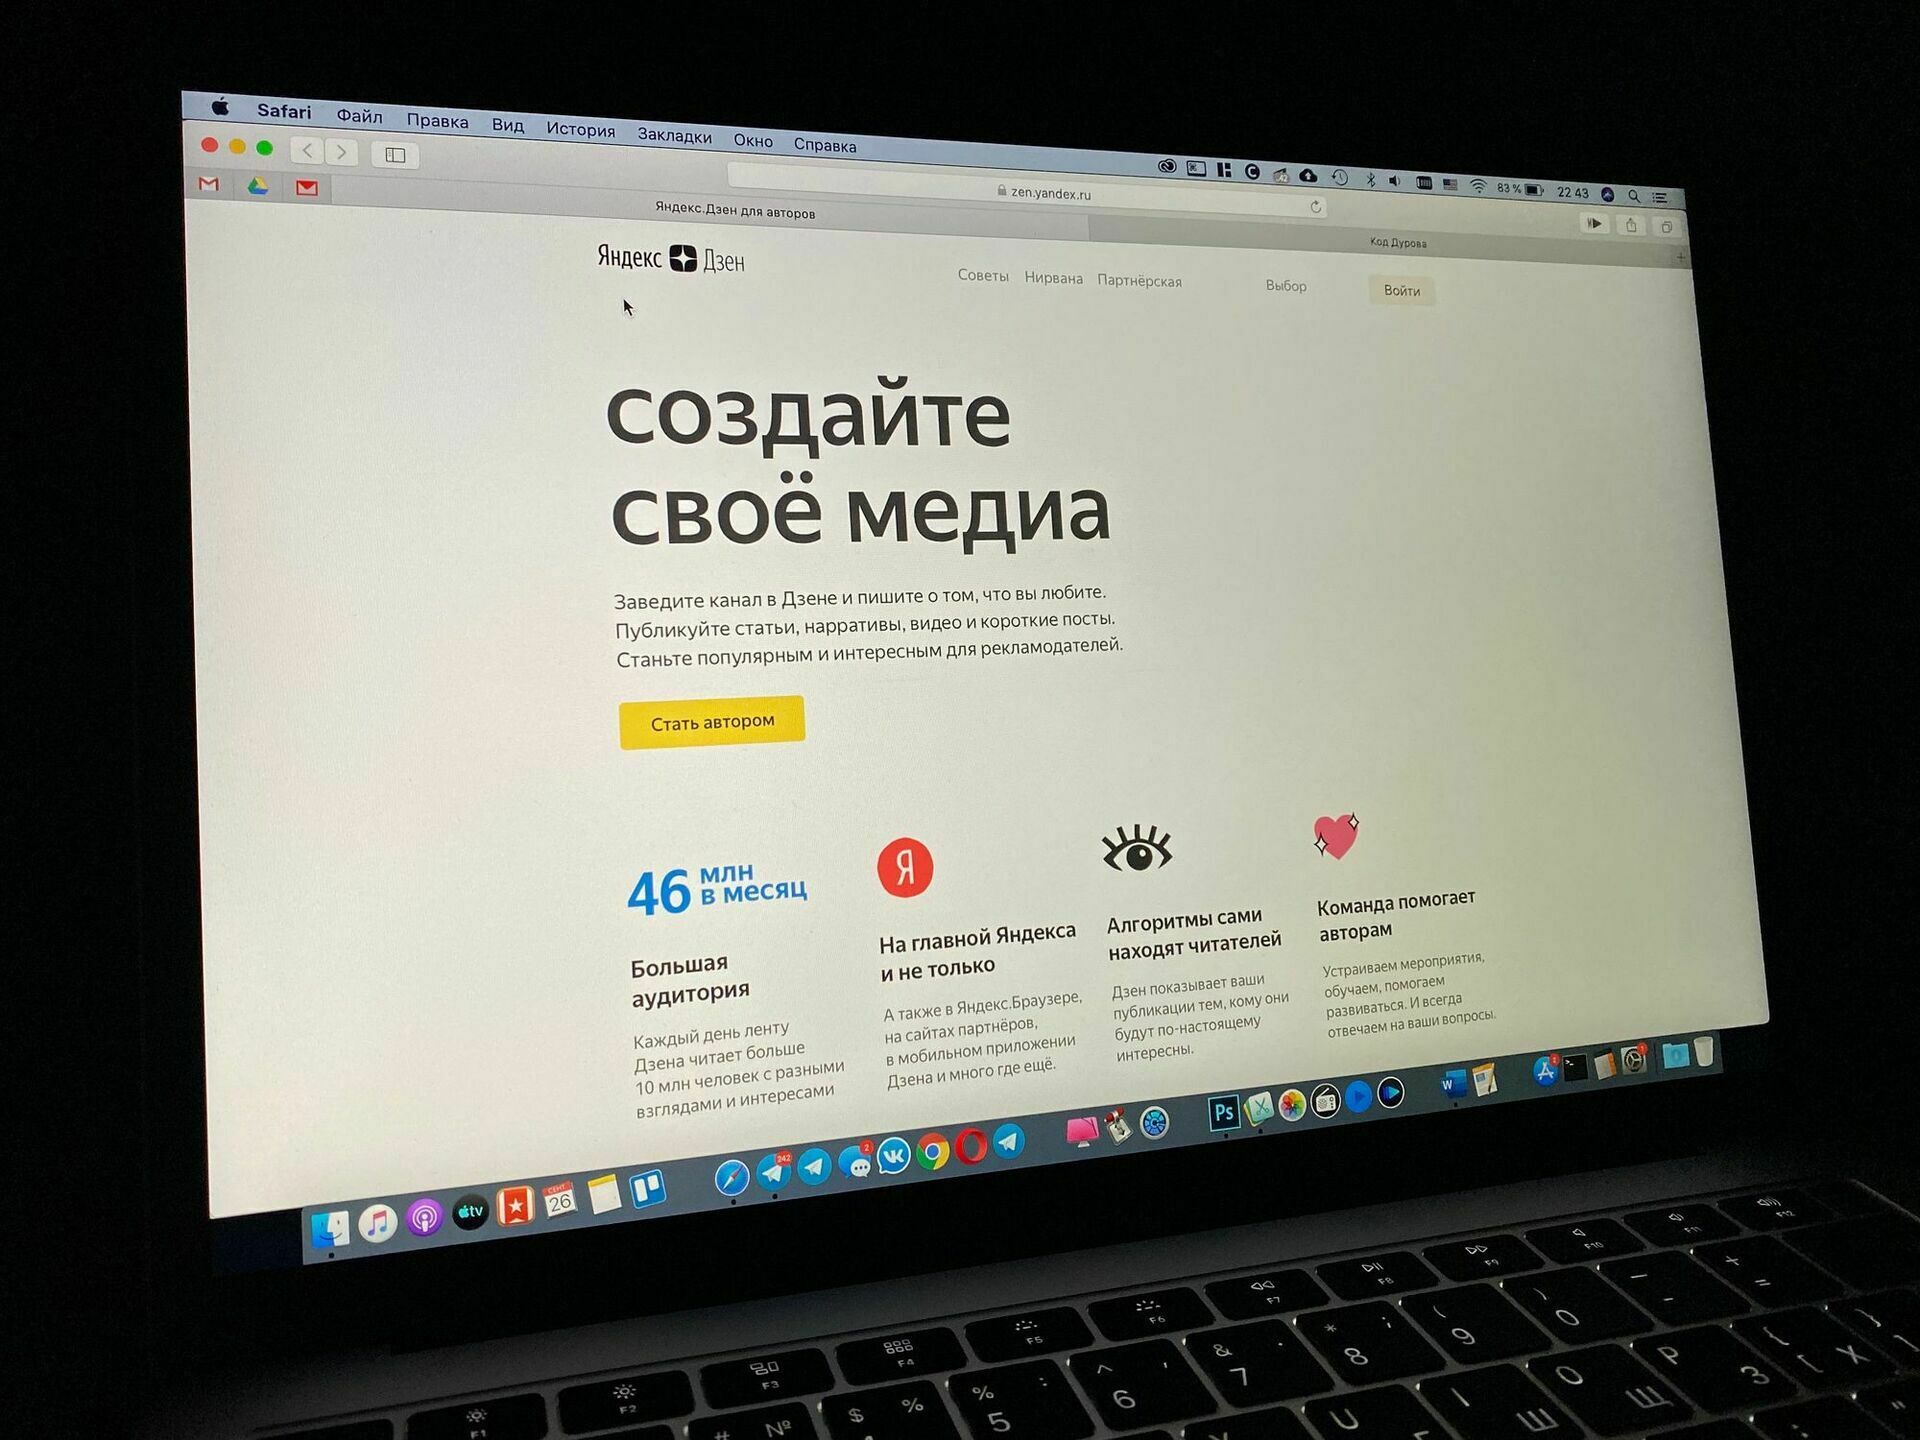 Used, abused and refused: the media amicably complained about the behavior of Yandex Zen